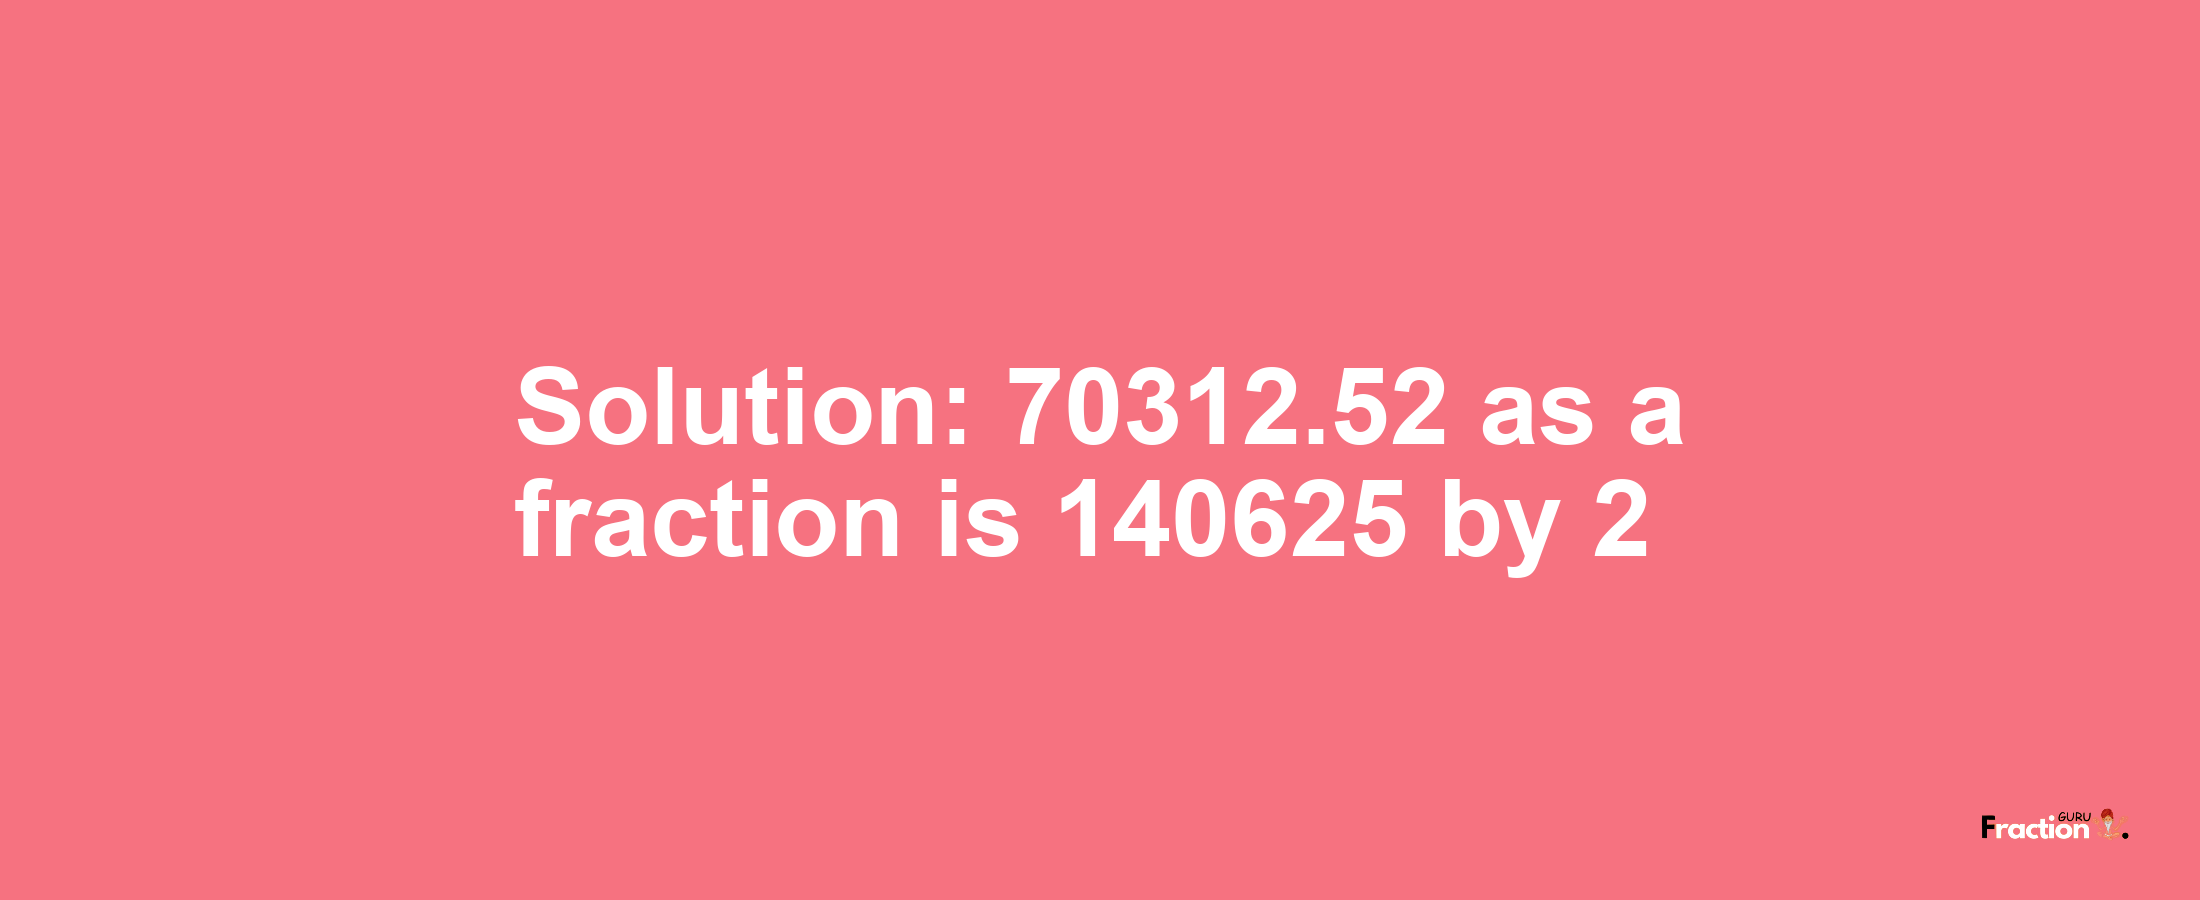 Solution:70312.52 as a fraction is 140625/2